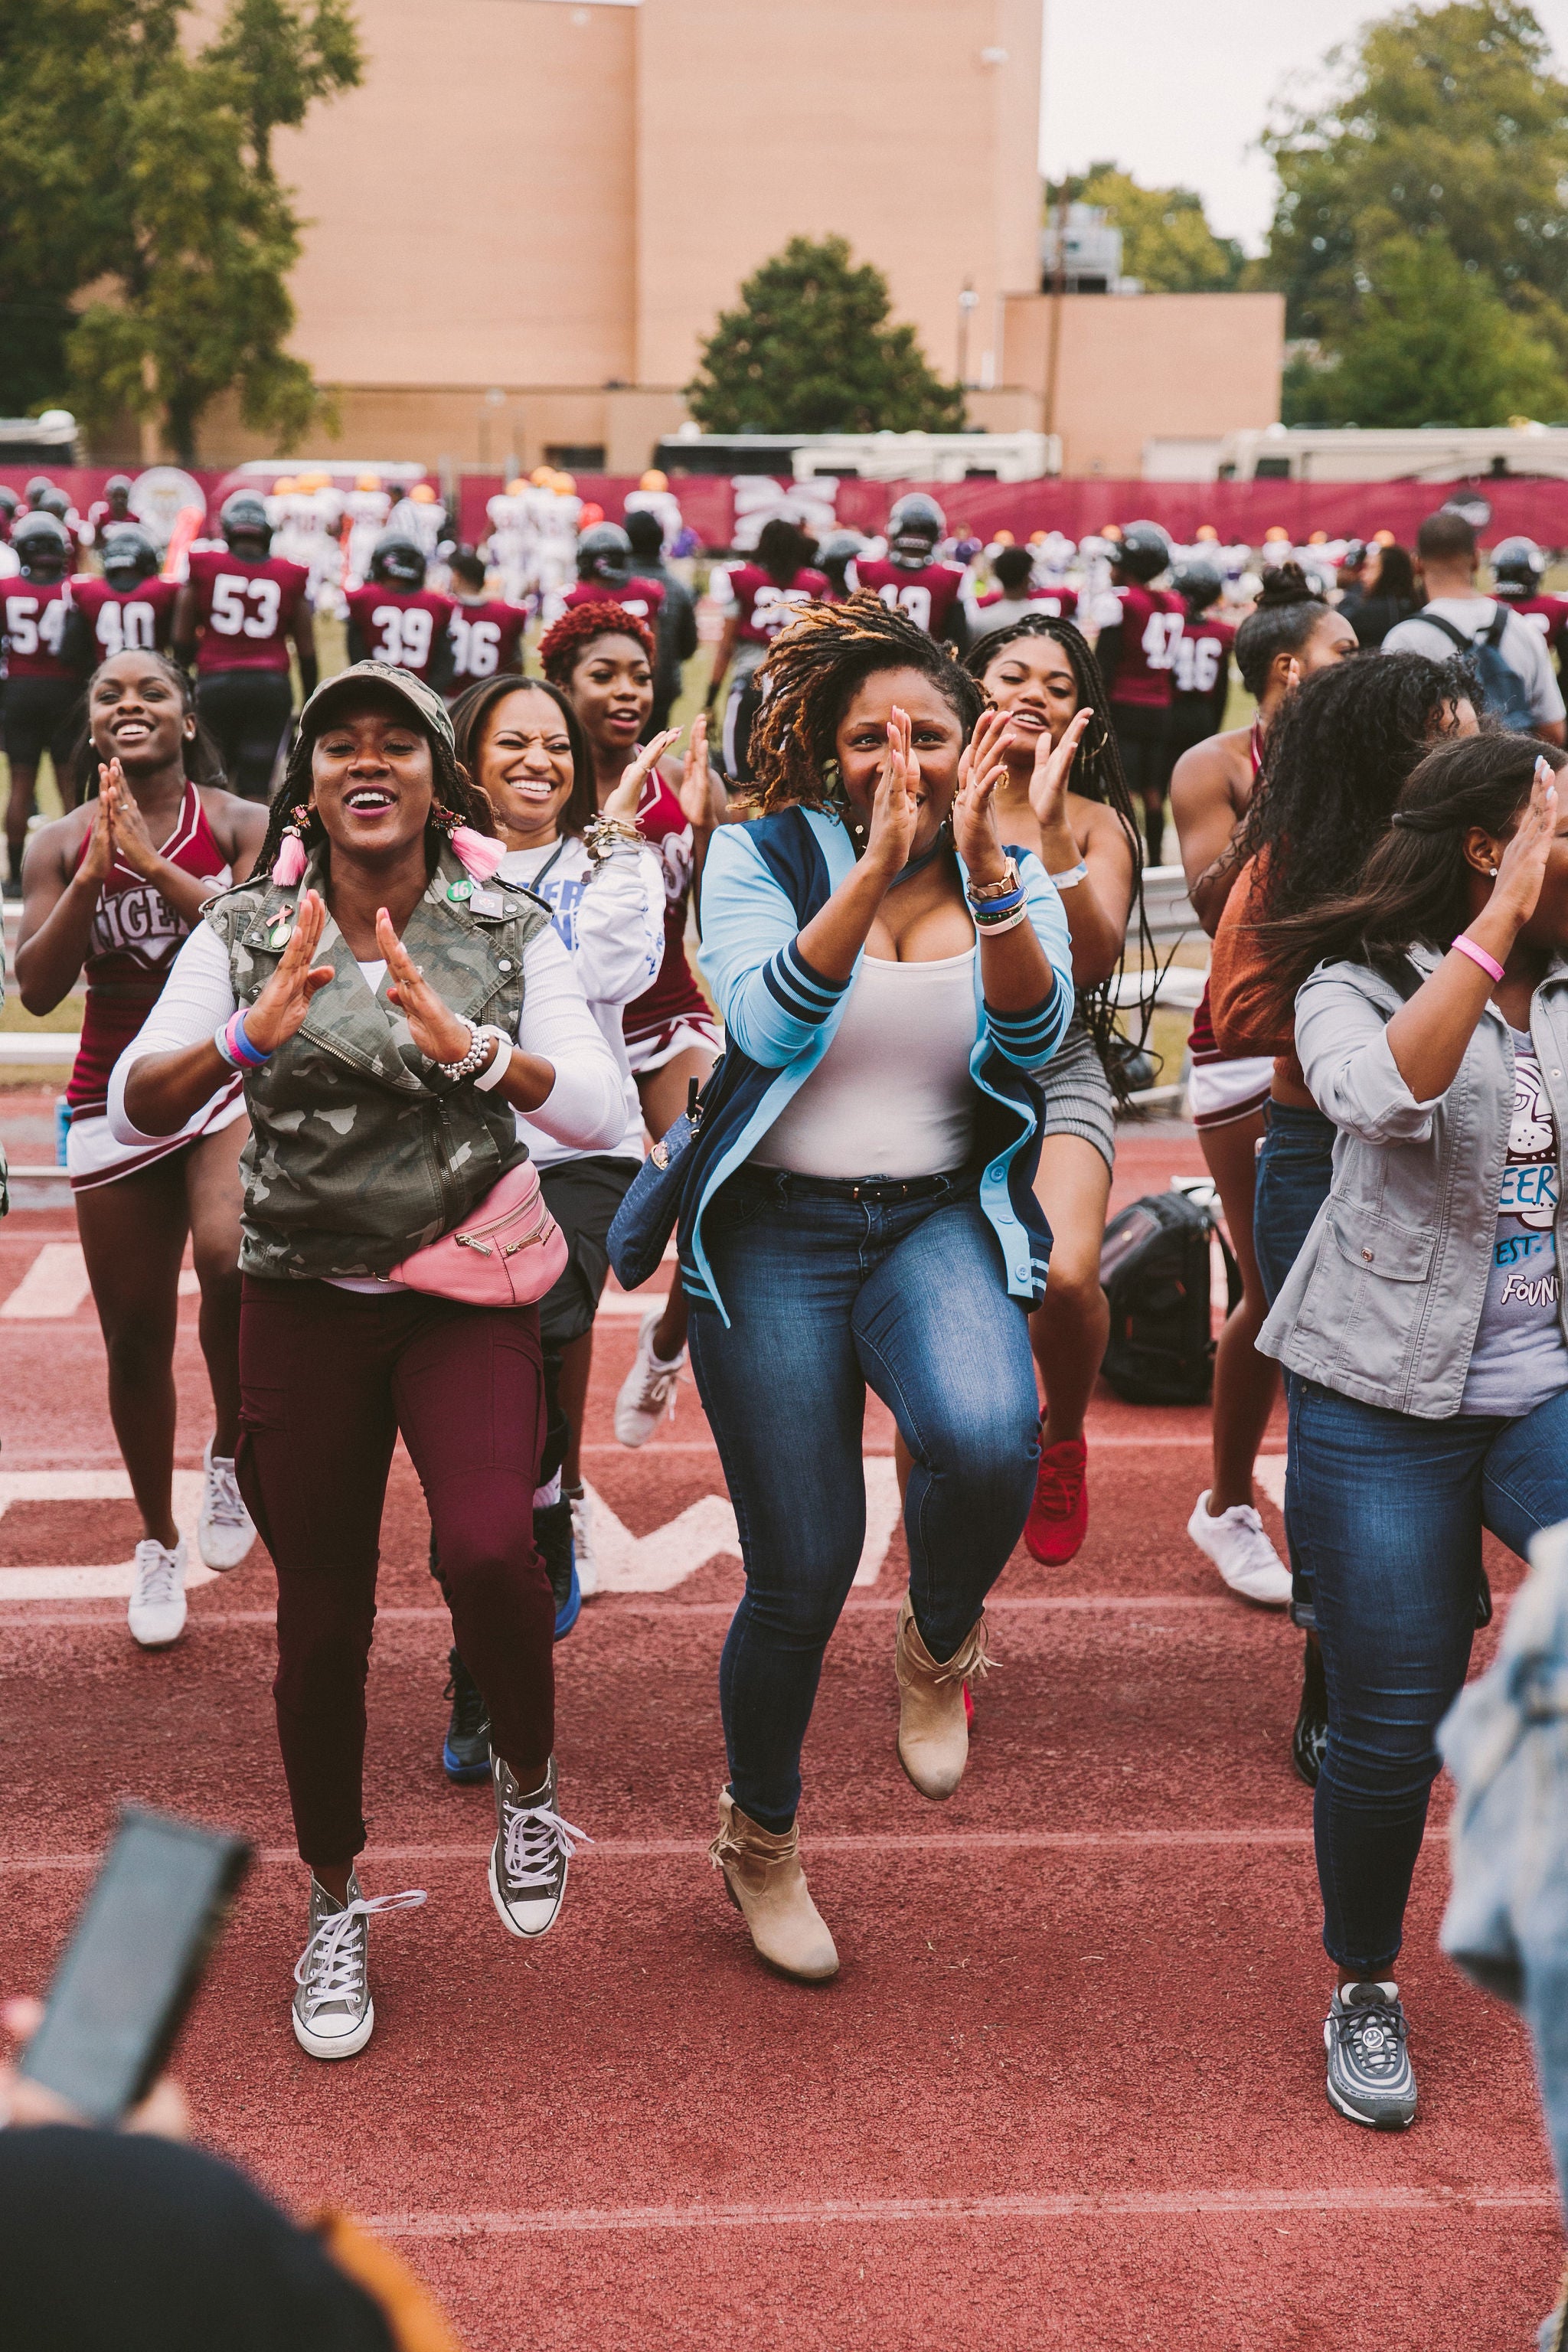 These Spelhouse Homecoming Weekend Photos Will Give You Major FOMO